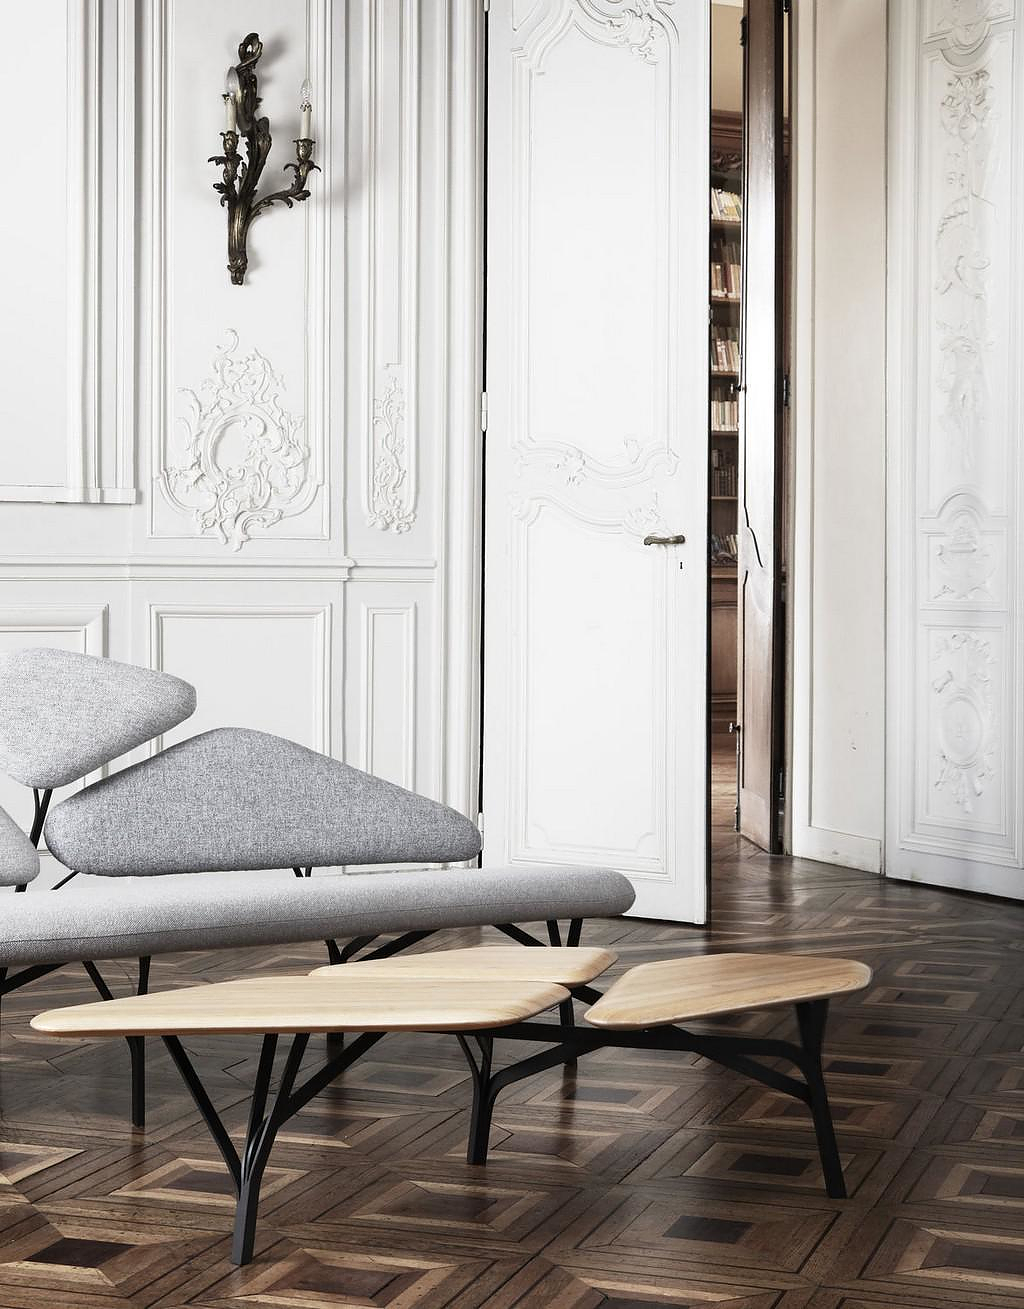 Borghese Sofa & Coffee Table by Noé Duchaufour Lawrance for La Chance.